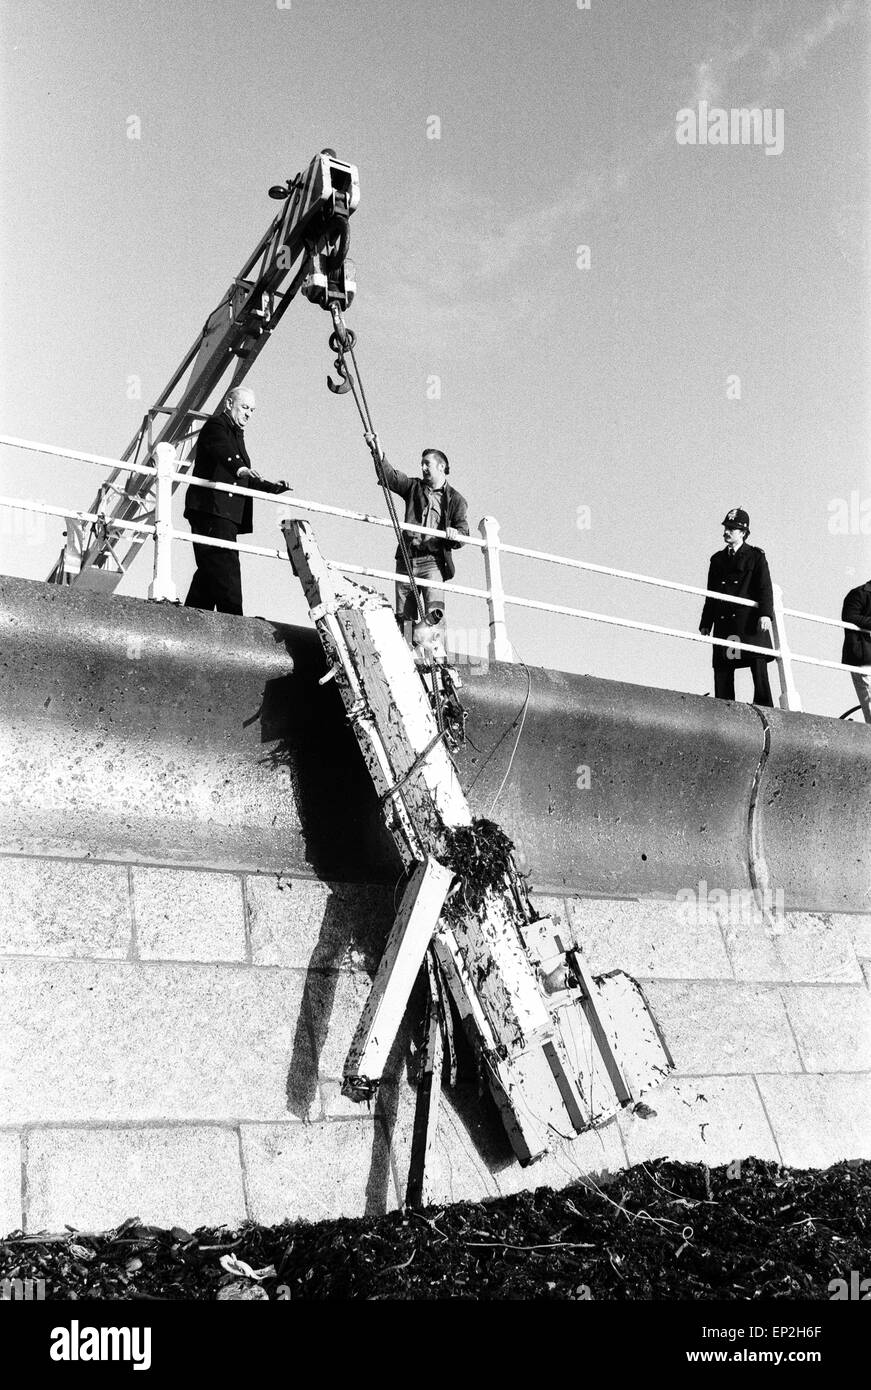 Penlee Life Boat Disaster wreckage from the lifeboat is brought ashore Monday 21st December 1981. The Penlee life boat was launched from the Cornish village of Mousehole at exactly 20:12 on Saturday night (19th) after the freighter Union Star sent out distress call. At 21:22 coxswain Trevelyan Richards radioed that he had managed to get four people aboard. Then there was silence. All hope has now been abandoned for the lifeboatmen and the eight people from the freighter. The Union Star on its maiden voyage lays capsized and shattered at the foot of cliffs at Tater Du just along the coast. Stock Photo